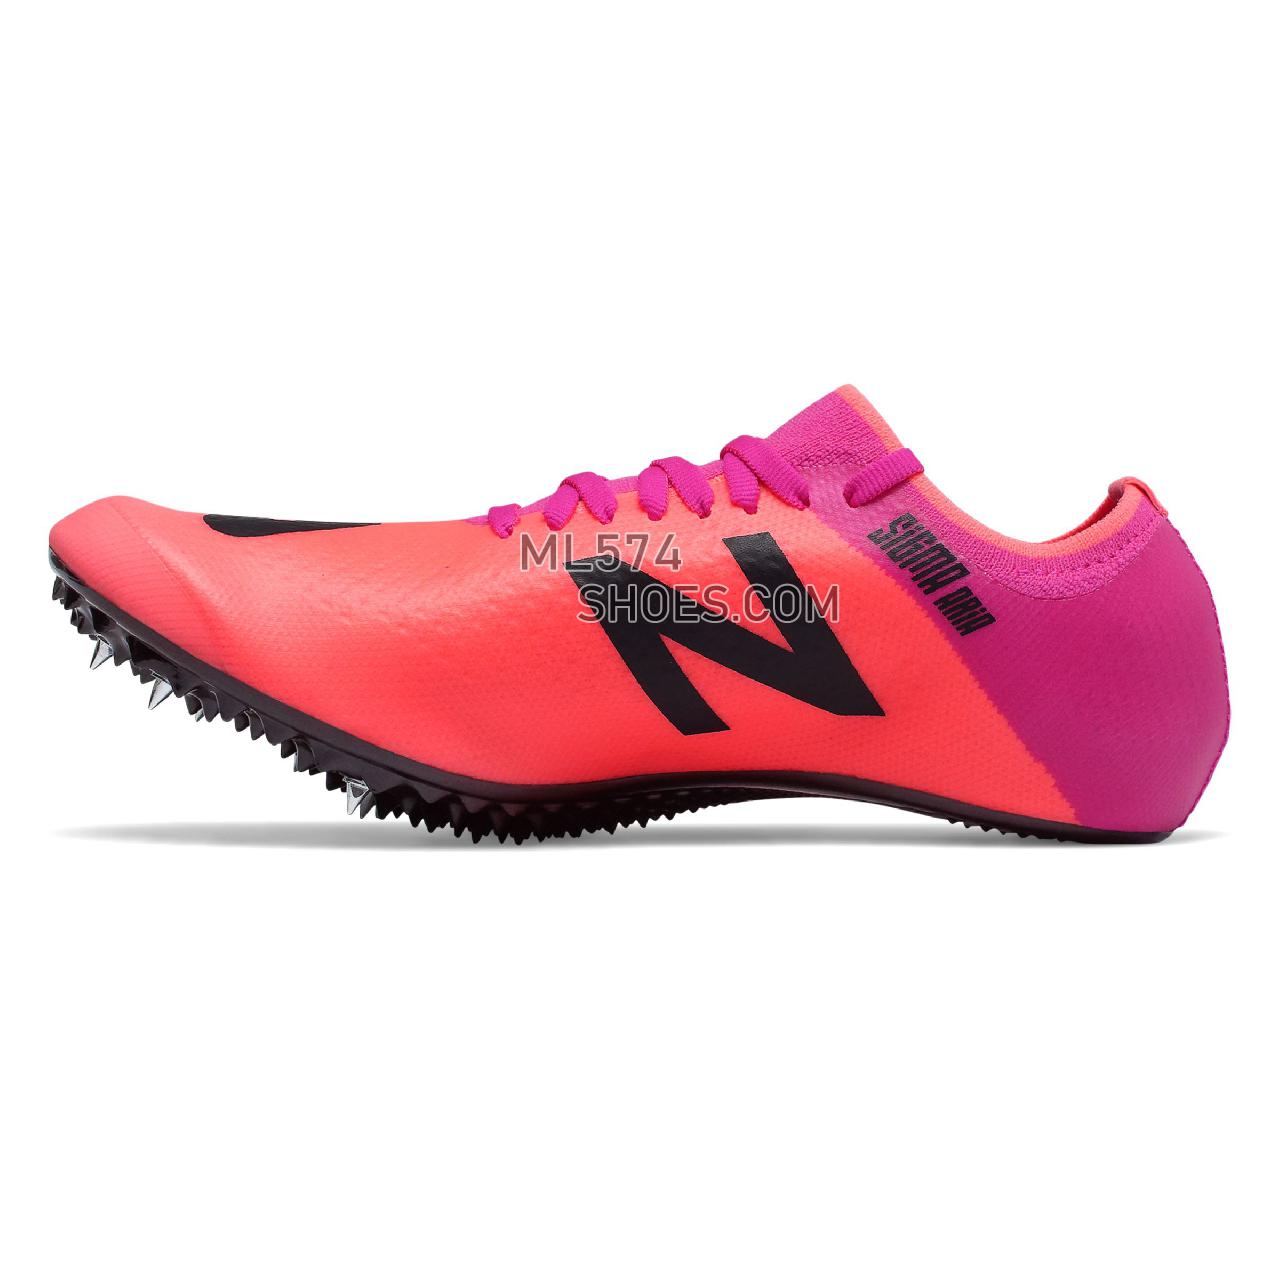 New Balance Sigma Aria - Men's Race Running - Guava with Peony and Black - USDSGMAP